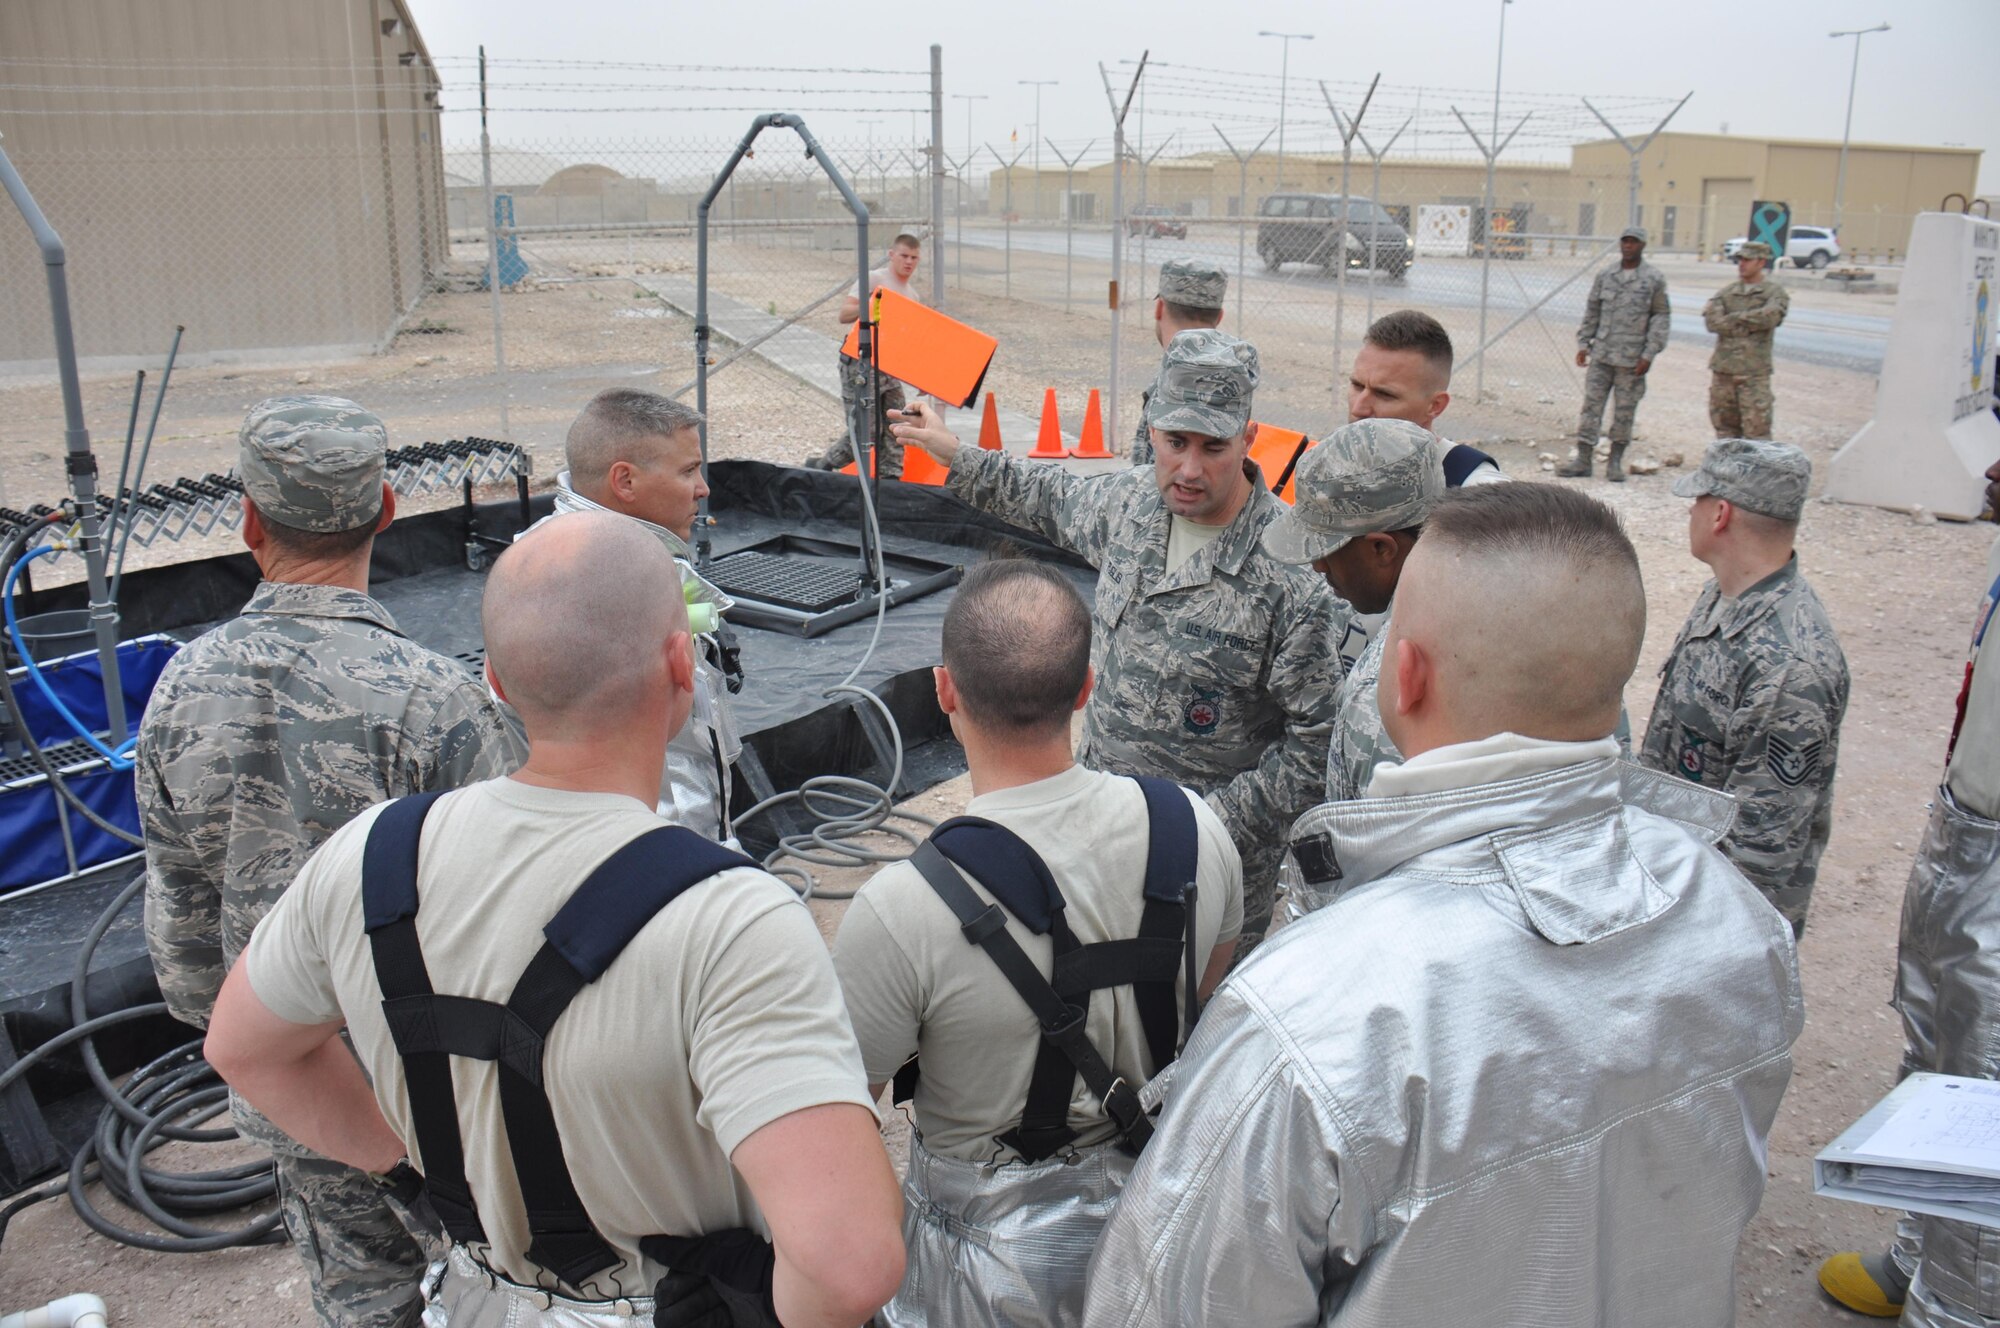 Master Sgt. Michael Puglisi, 379th Expeditionary Civil Engineer Squadron assistant fire chief of operations, gives instructions to firefighters during a hazardous materials exercise at Al Udeid Air Base, Qatar March 16. Puglisi served as the incident commander for the exercise, which featured mock explosives and chemicals. The exercise provided first responders an opportunity to practice reacting to an emergency incident. Several emergency personnel participated in the exercise including security forces and medics. (U.S. Air Force photo by Tech. Sgt. James Hodgman/Released)